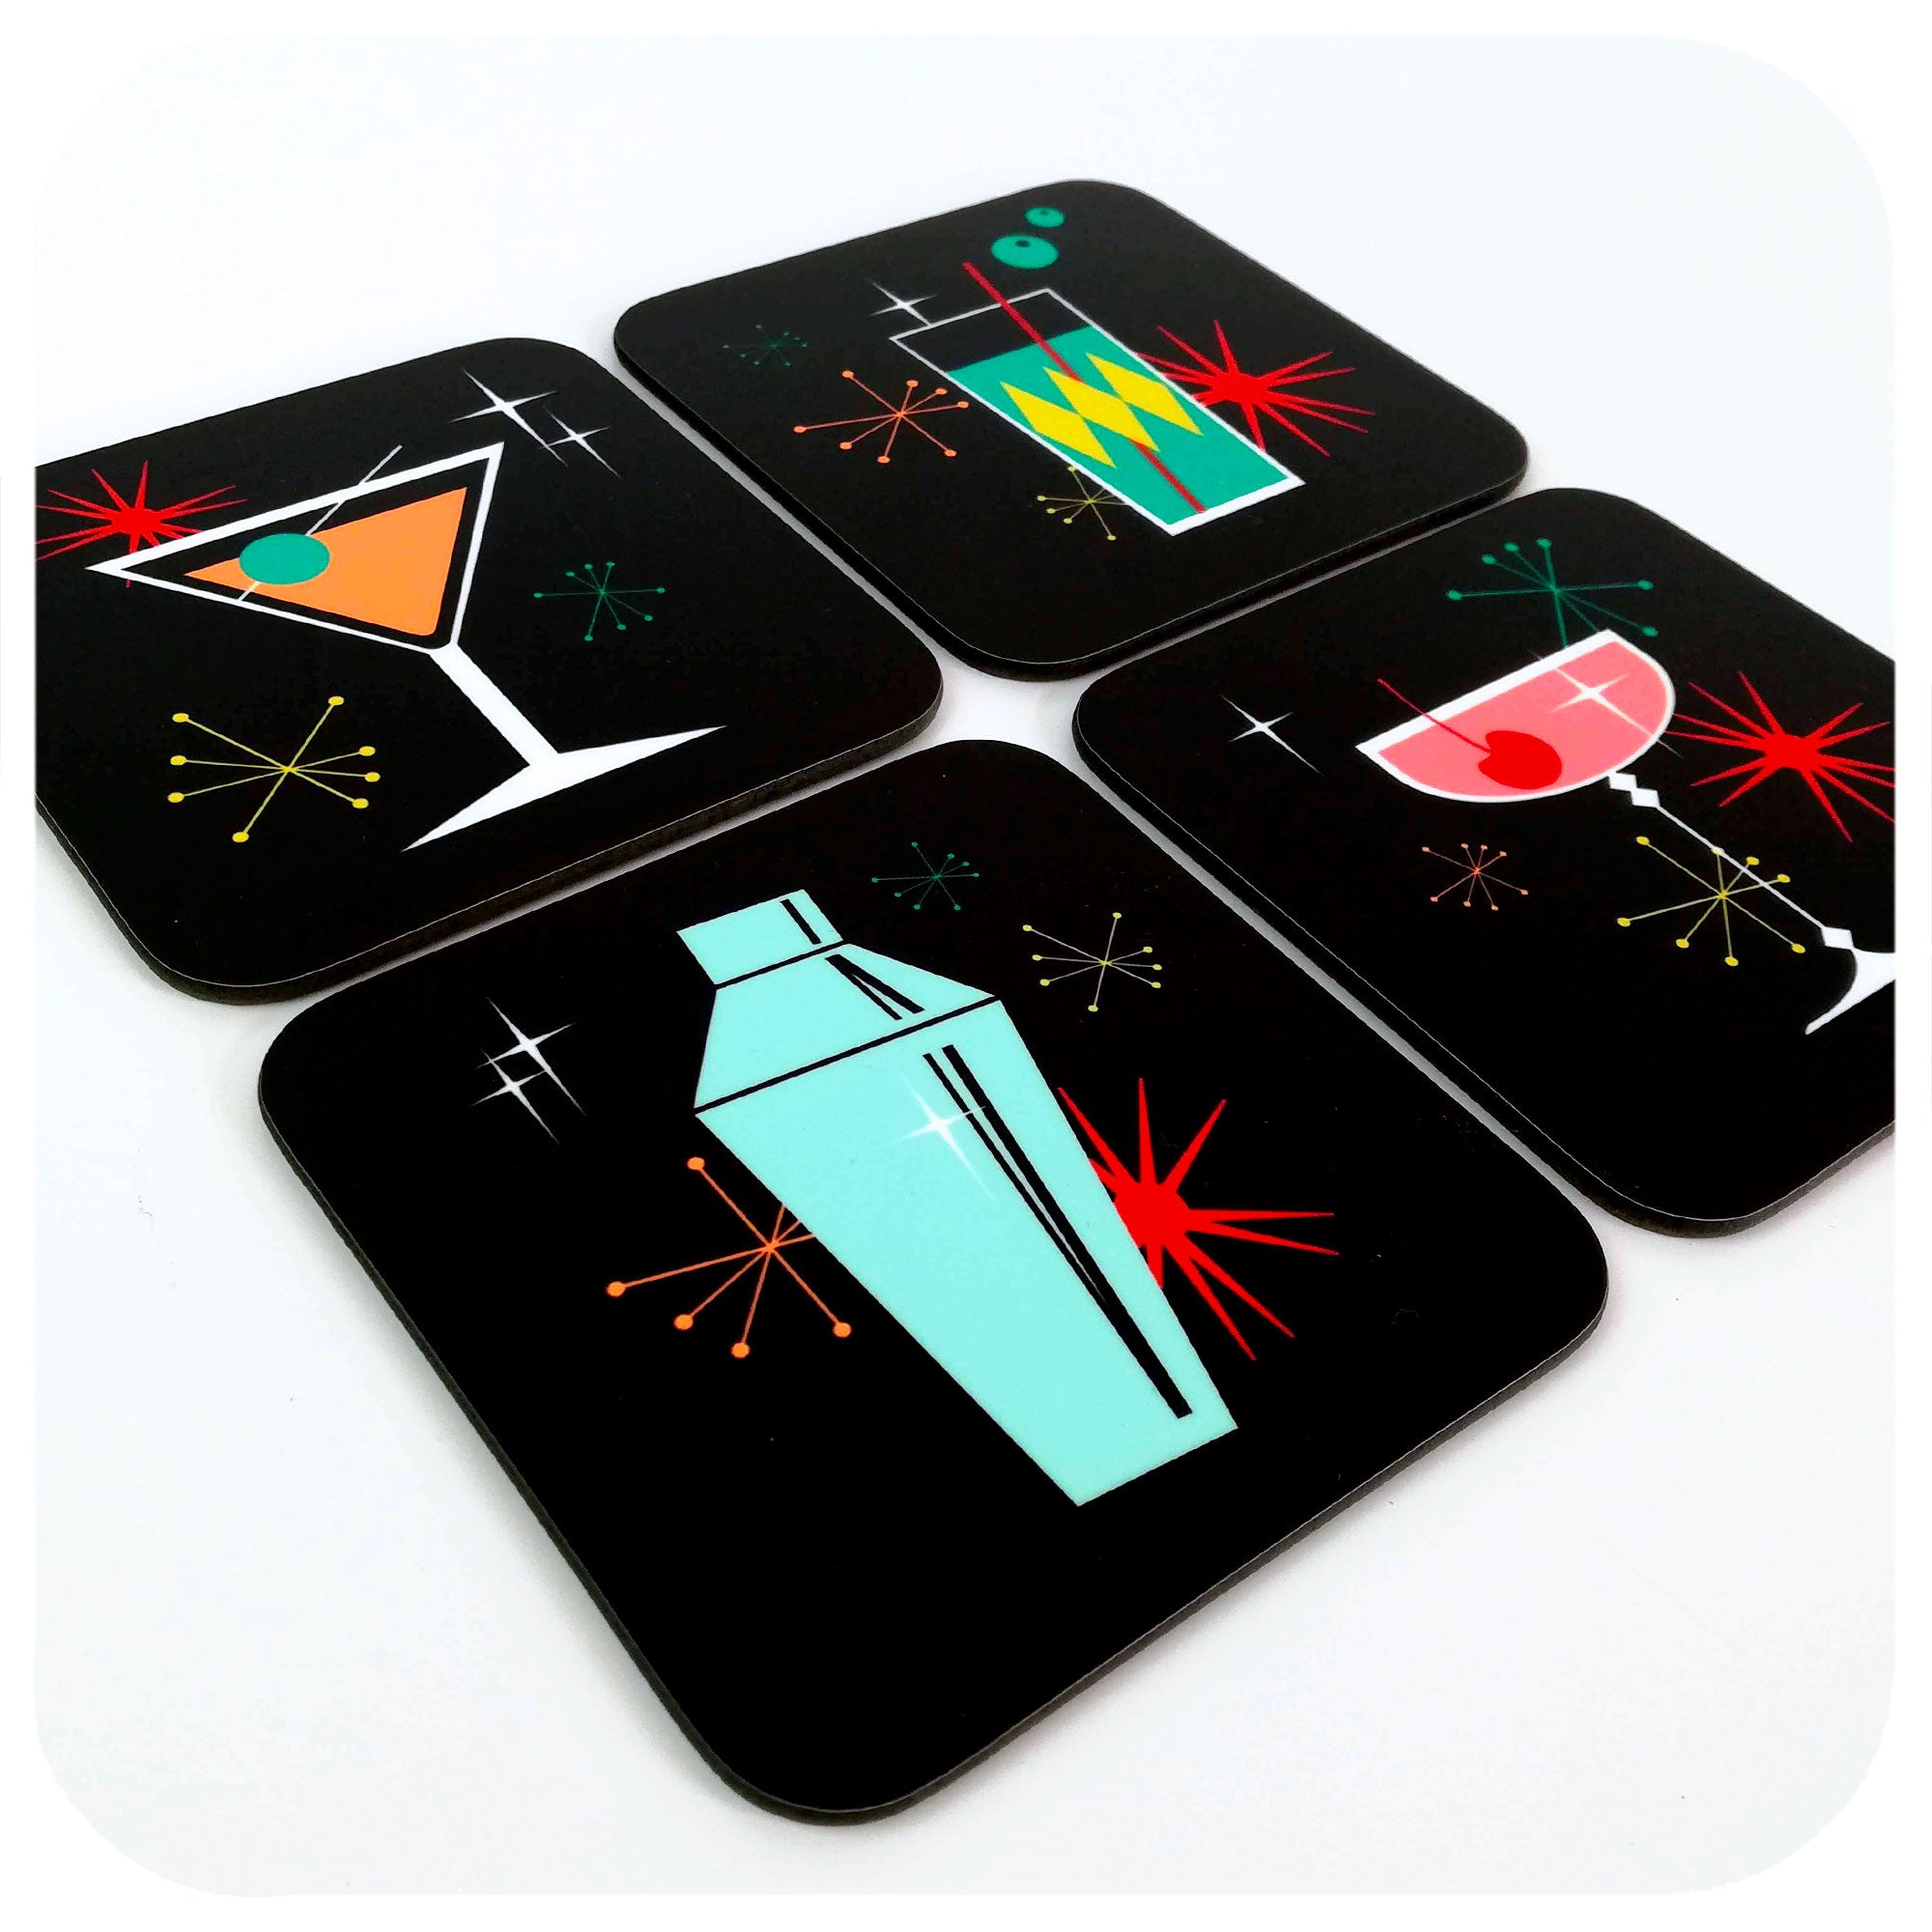 Cosmic Cocktail Coasters - Set of 4 featuring the Cocktail Shaker Coaster | The Inkabilly Emporium